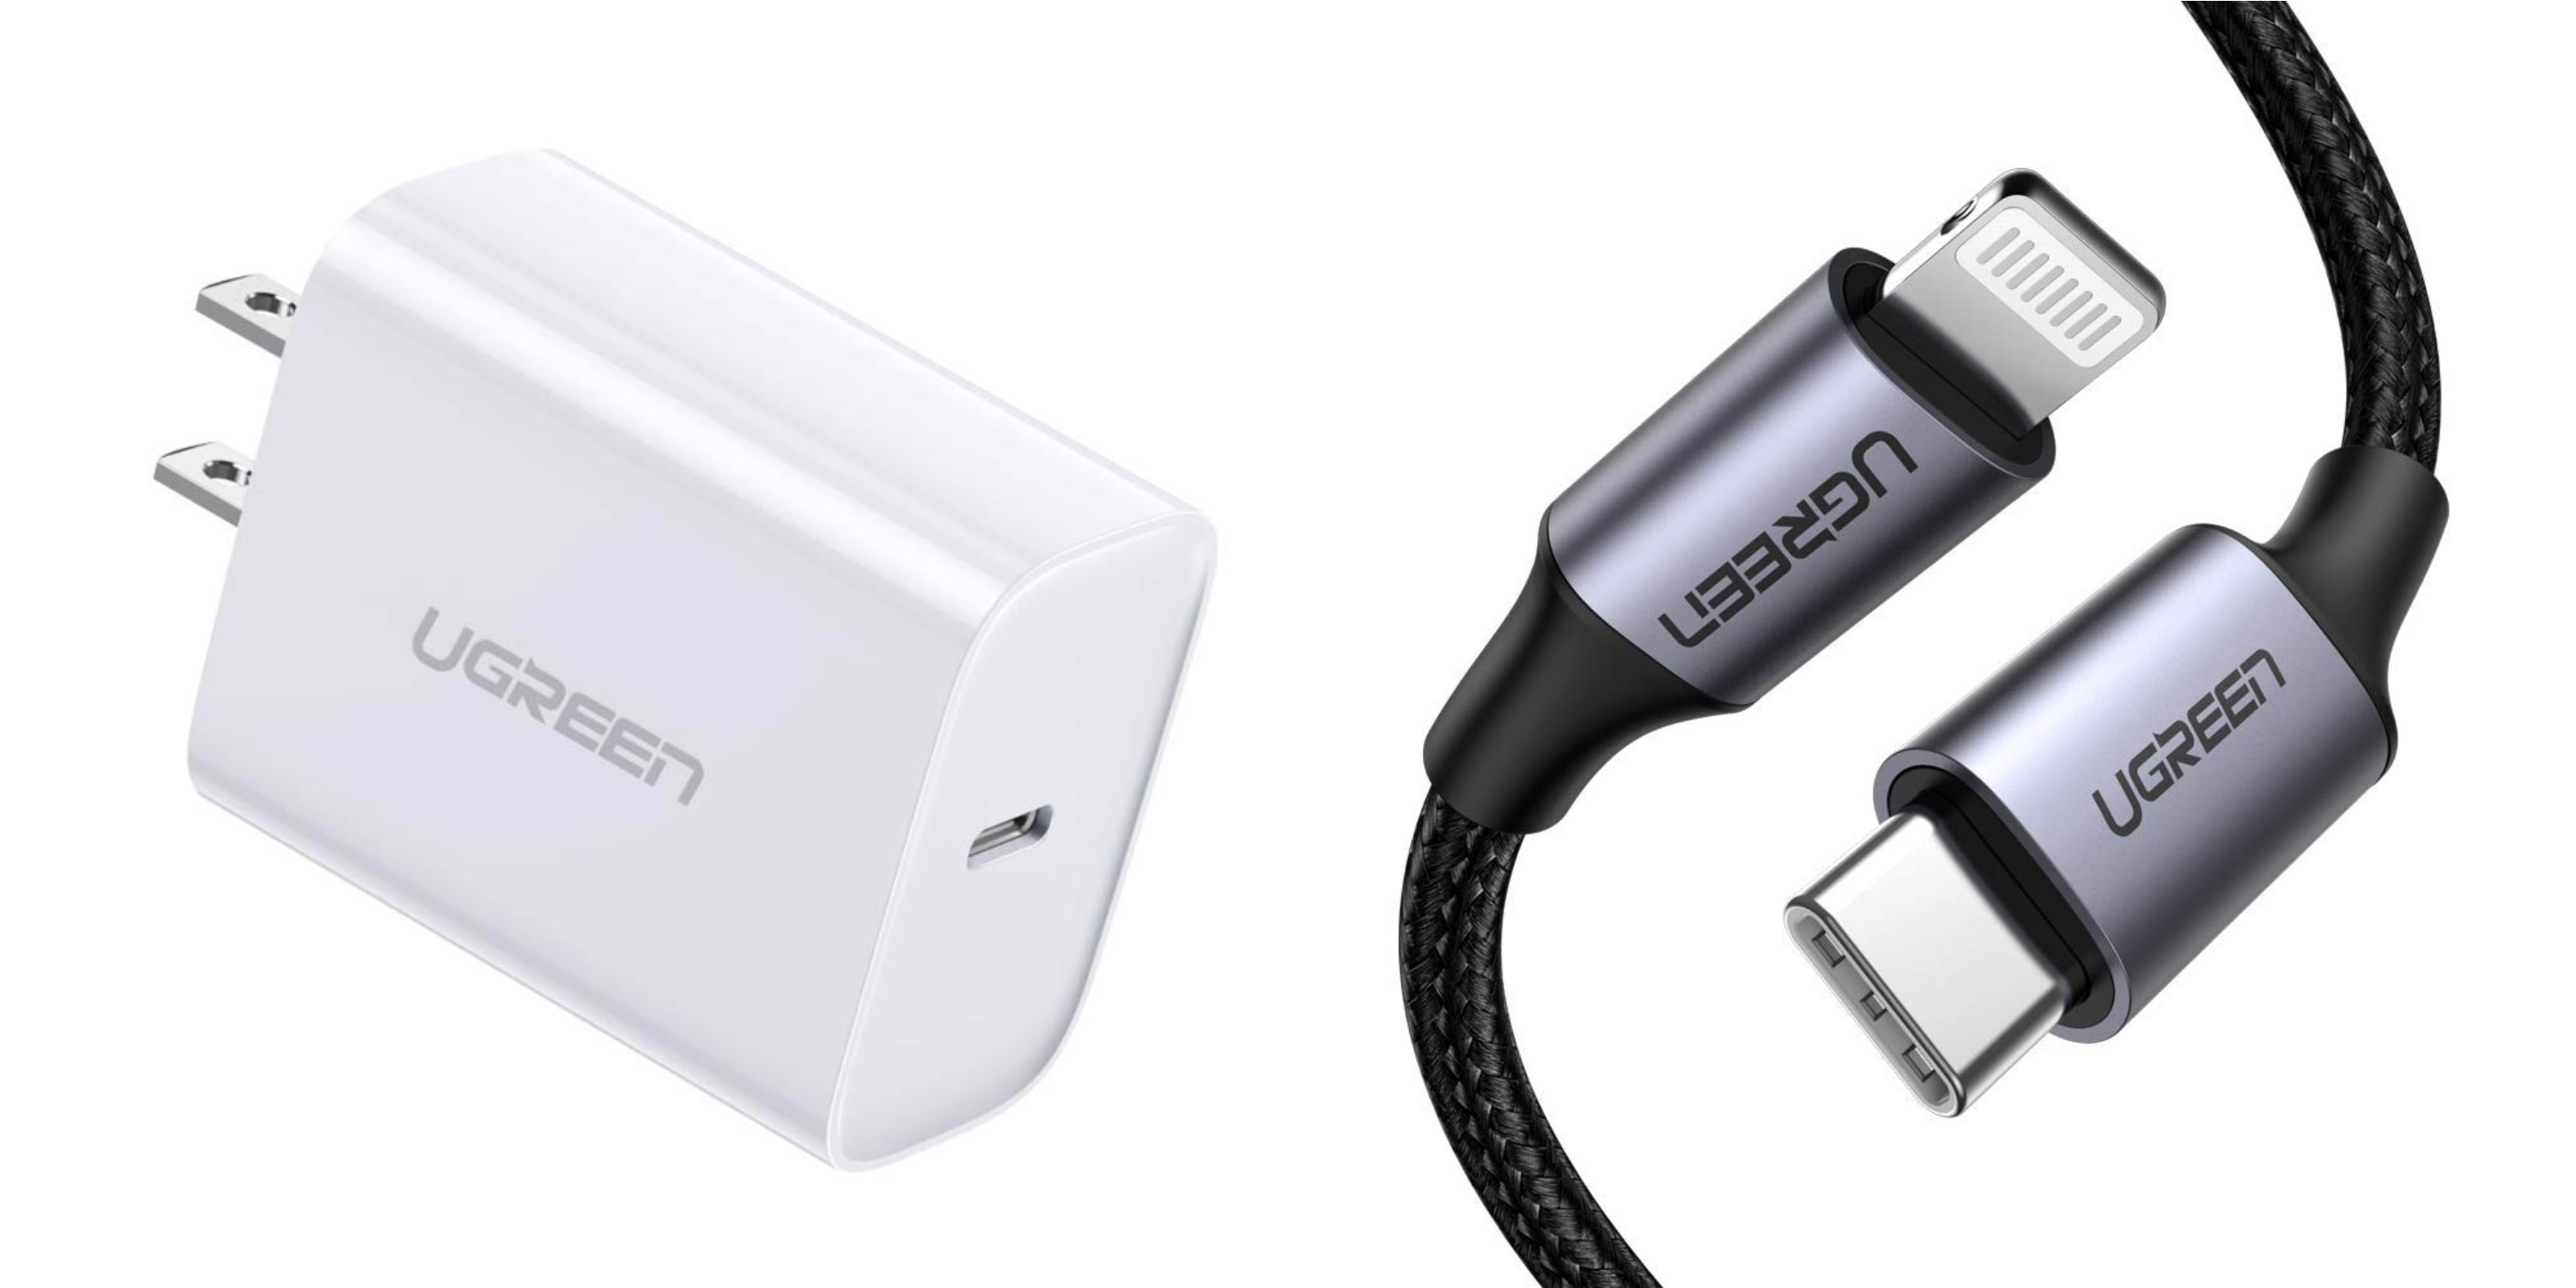 dæmning fravær eftertænksom Ugreen's USB-C charger offers 30W with compact design, 1/3 the cost of  Apple's at launch - 9to5Mac